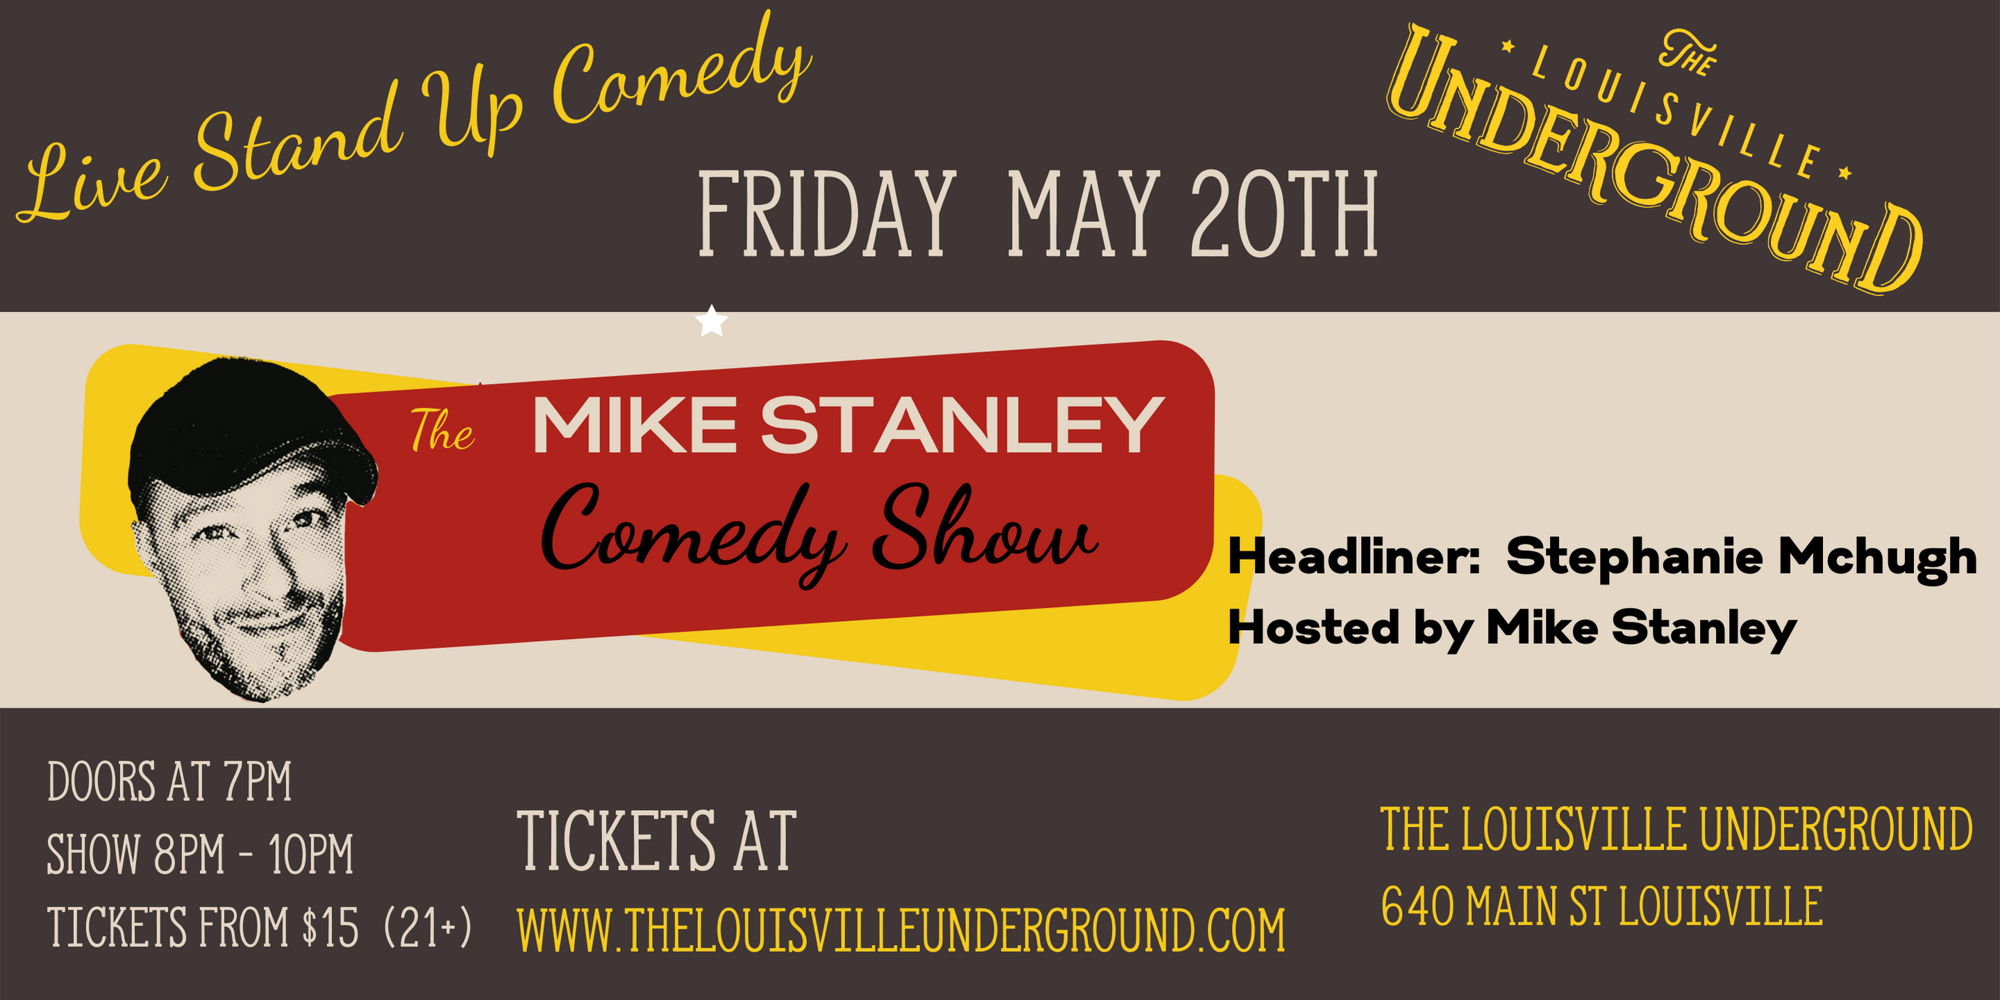 The Mike Stanley Comedy Show promotional image